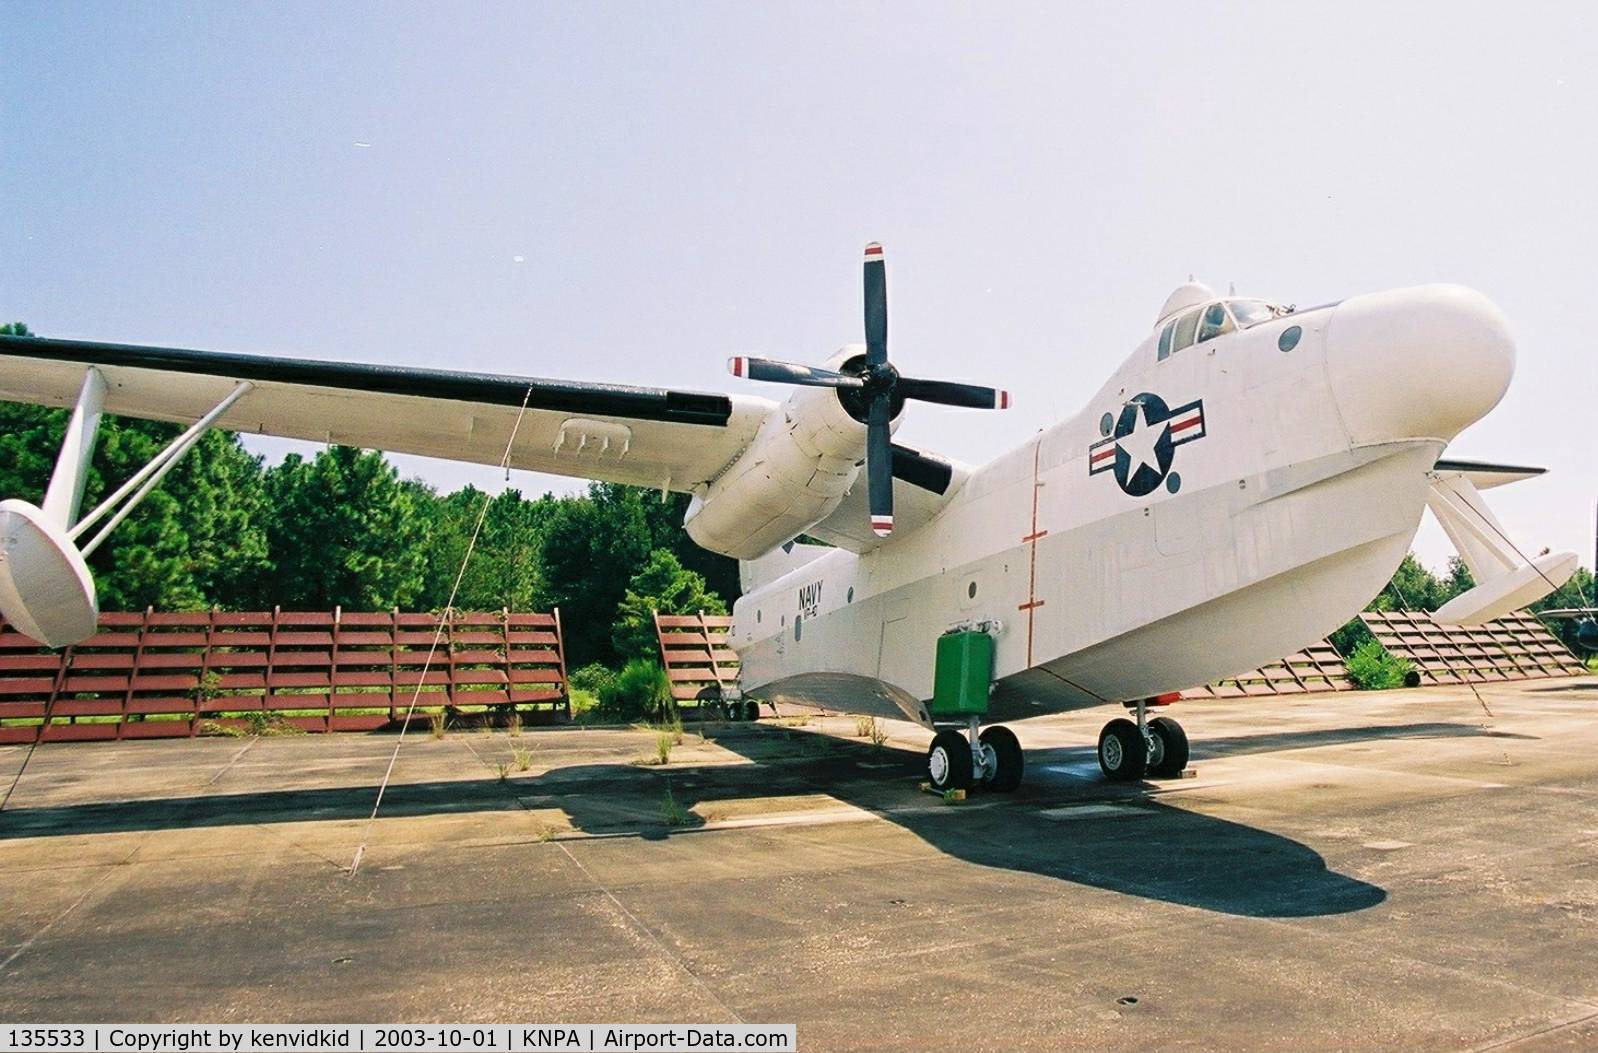 135533, 1956 Martin SP-5B Marlin C/N Not found 135533, On display at the Museum of Naval Aviation, Pensacola.